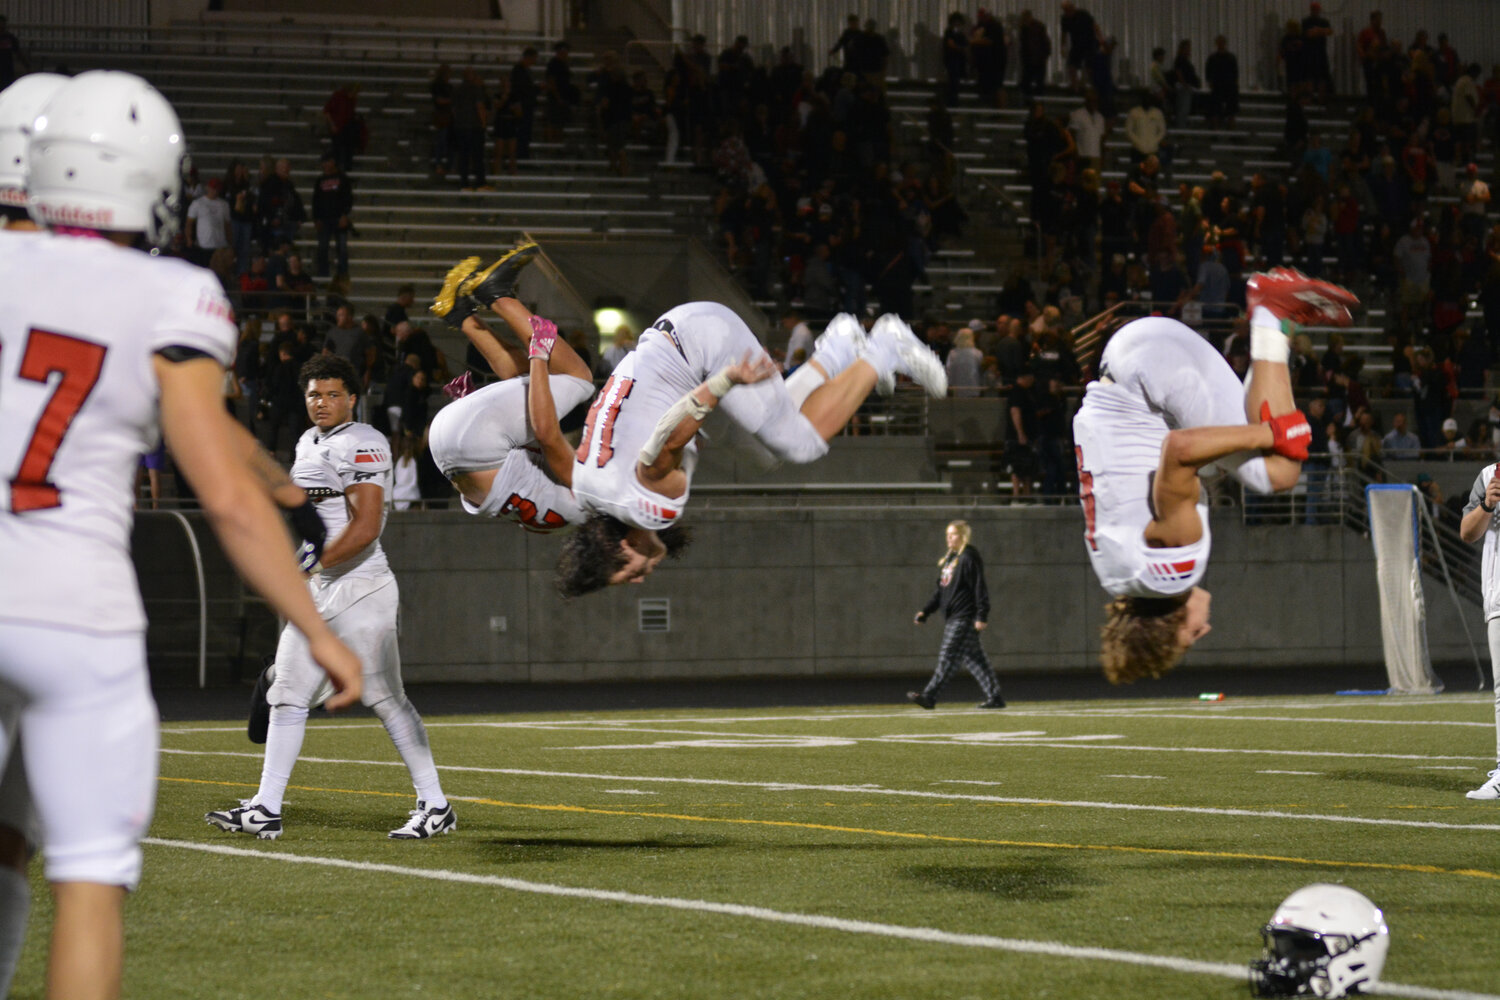 Yelm football athletes Anthony Kiamco (left), Nathan Ford (middle), and Jordan Lasher (right) deliver the tradional “post-game backflip” on Sept. 1 after Yelm beat Camas 8-7.